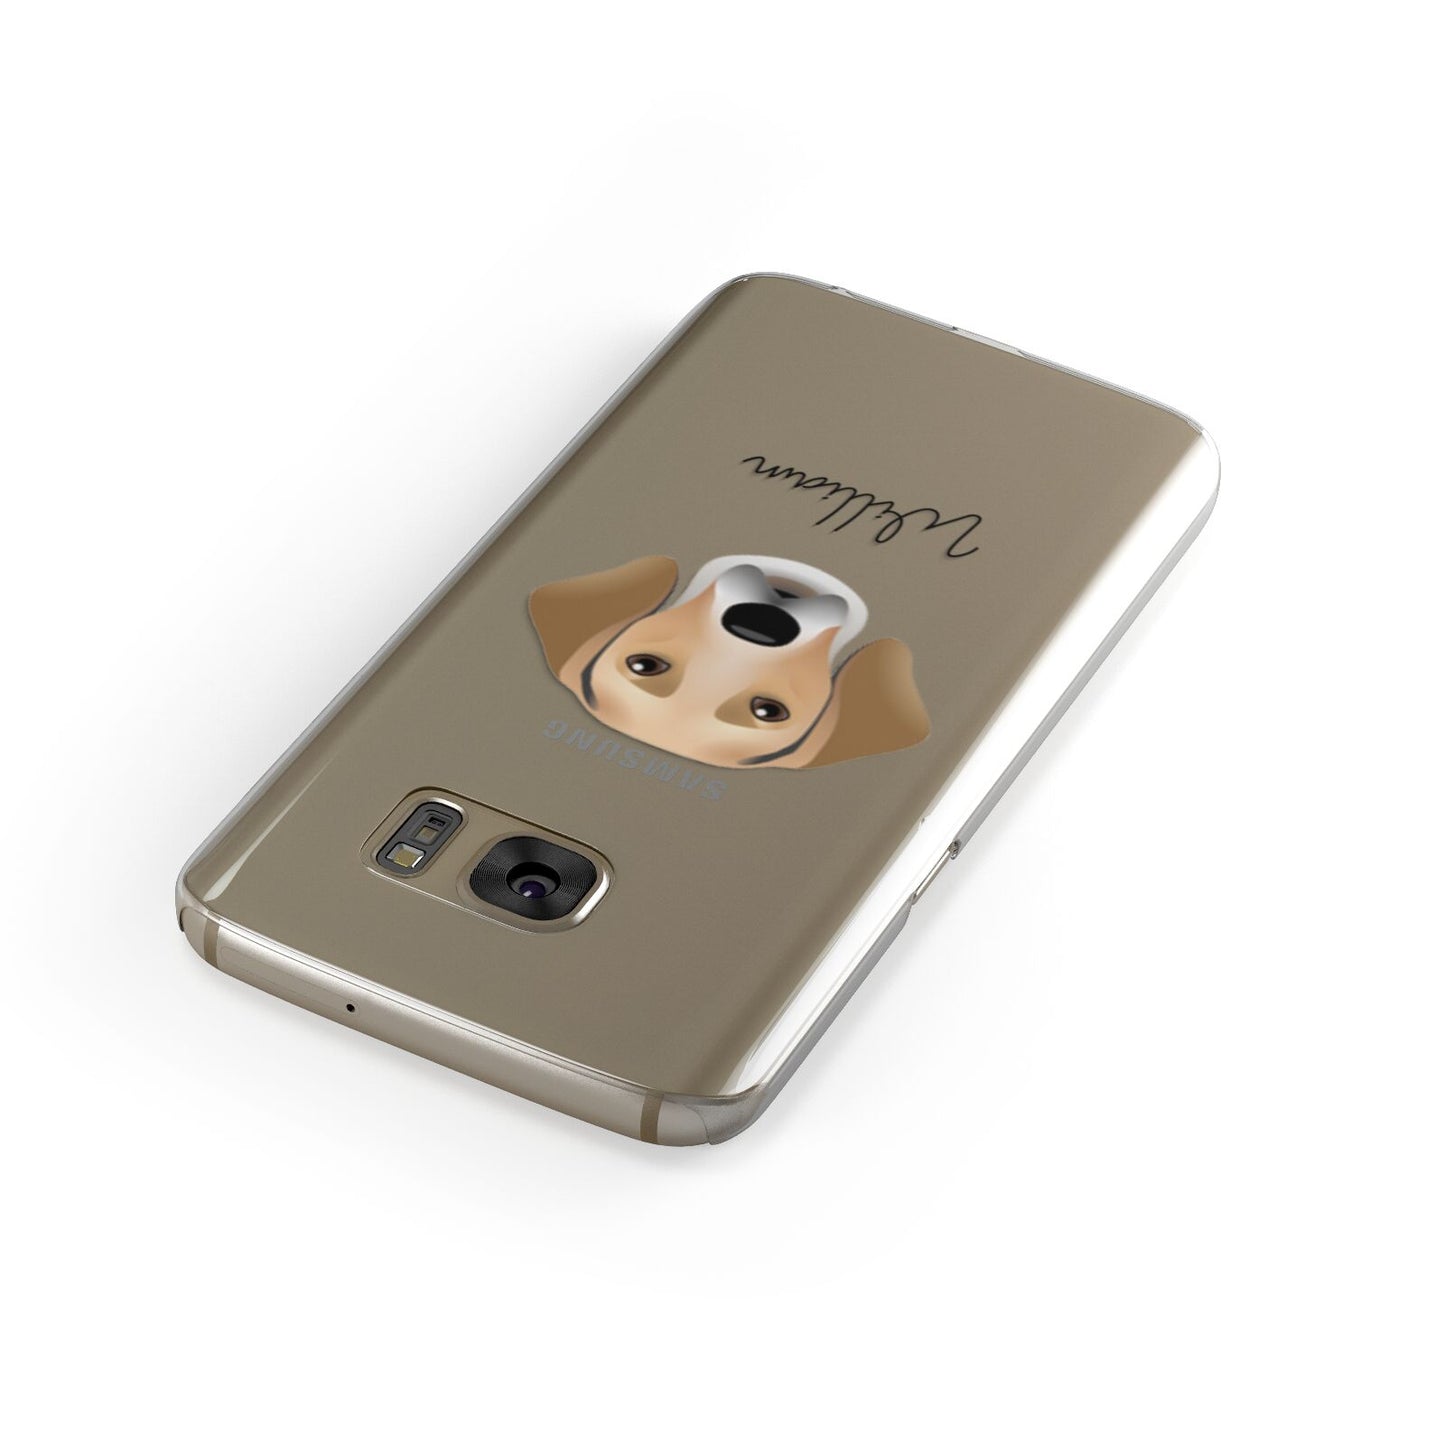 Harrier Personalised Samsung Galaxy Case Front Close Up